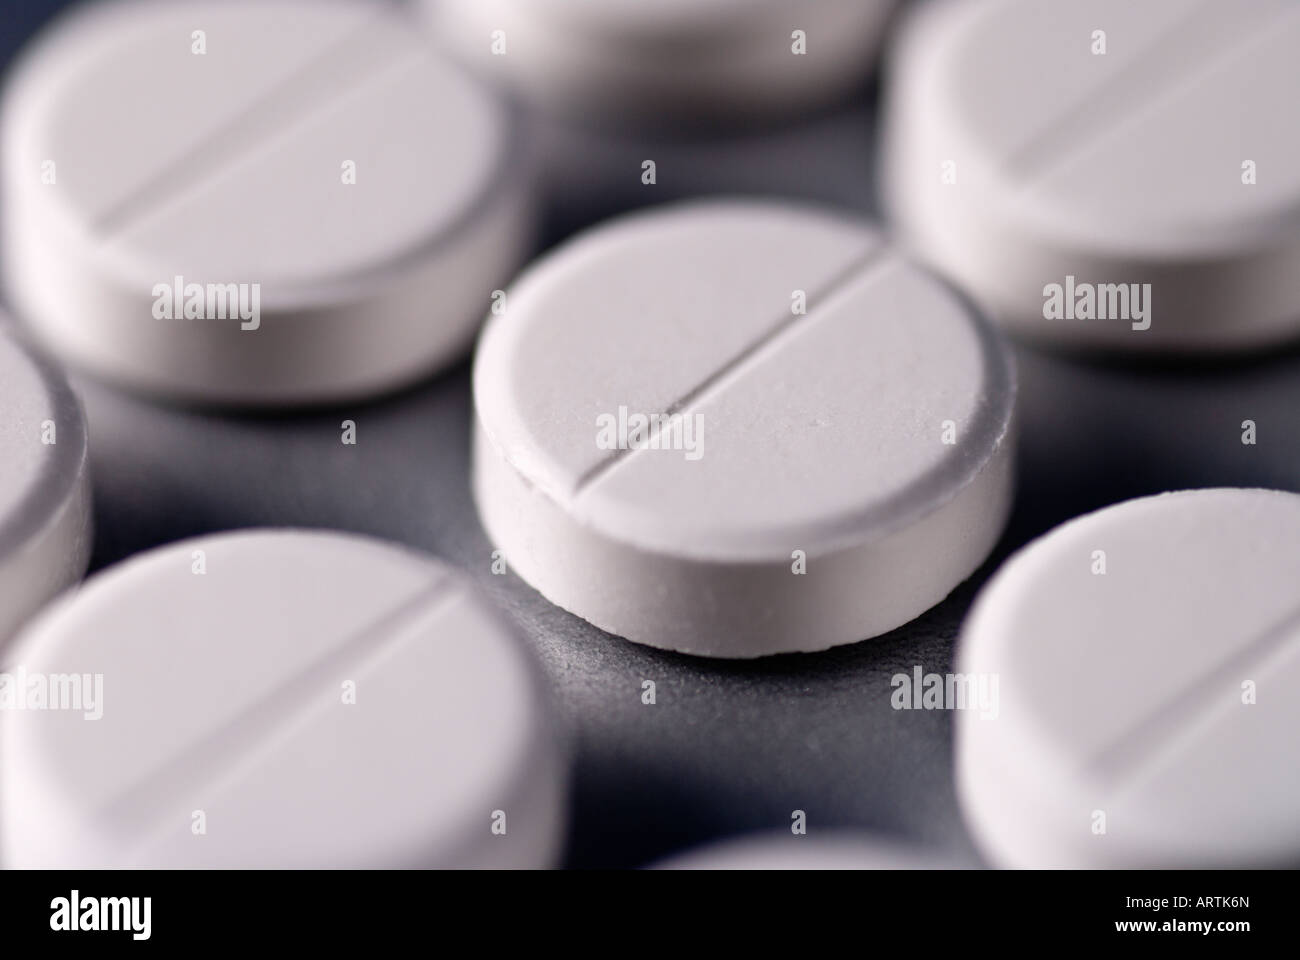 White pills on a silver background. Stock Photo